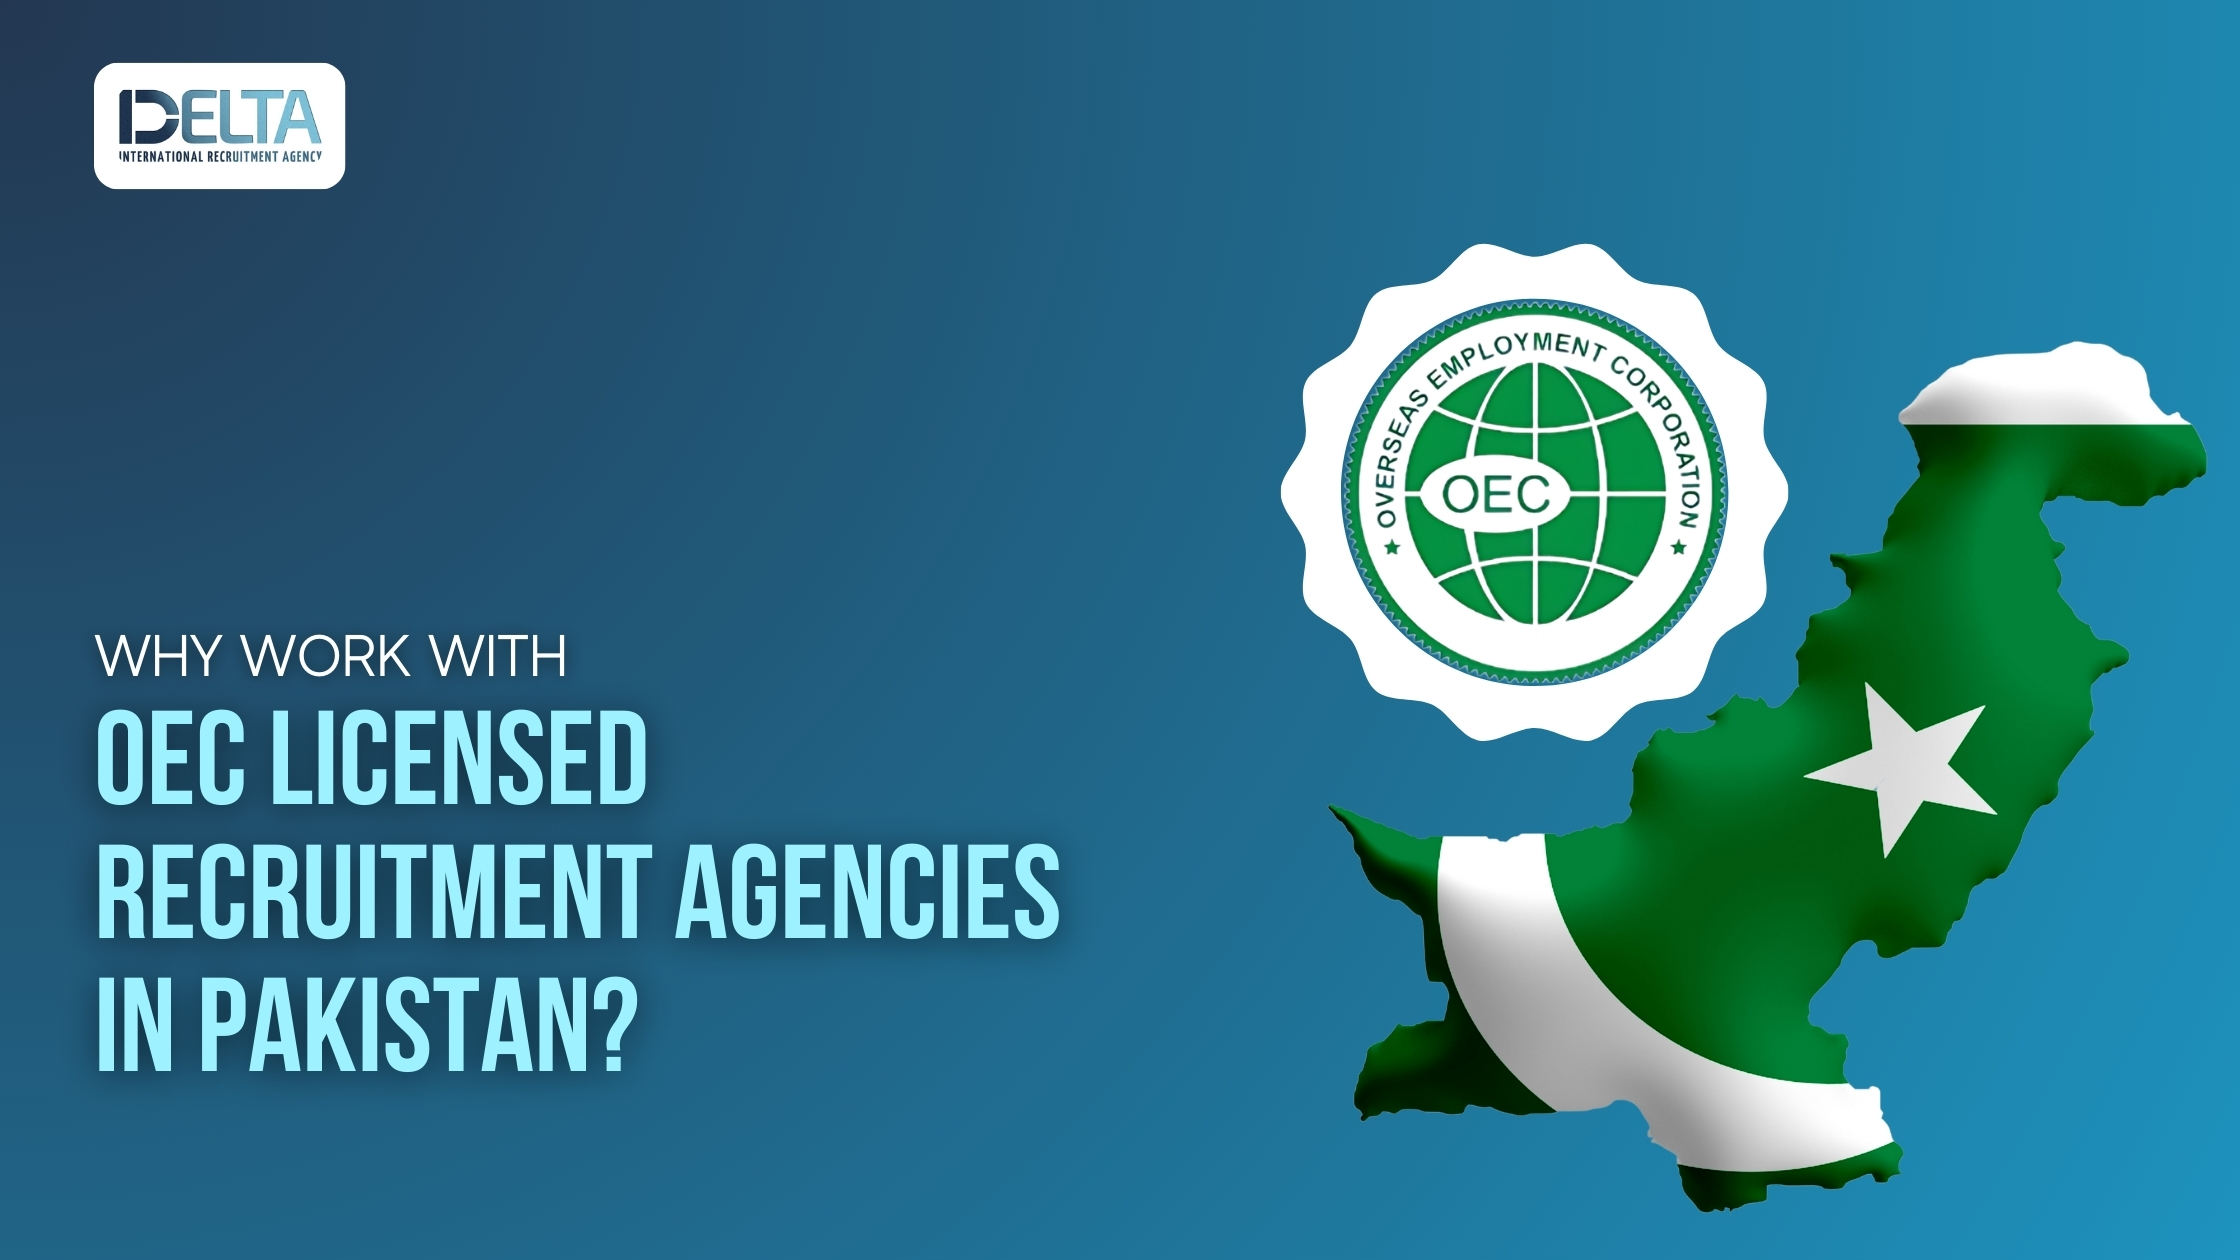 Why Work with OEC Licensed Recruitment Agencies in Pakistan?